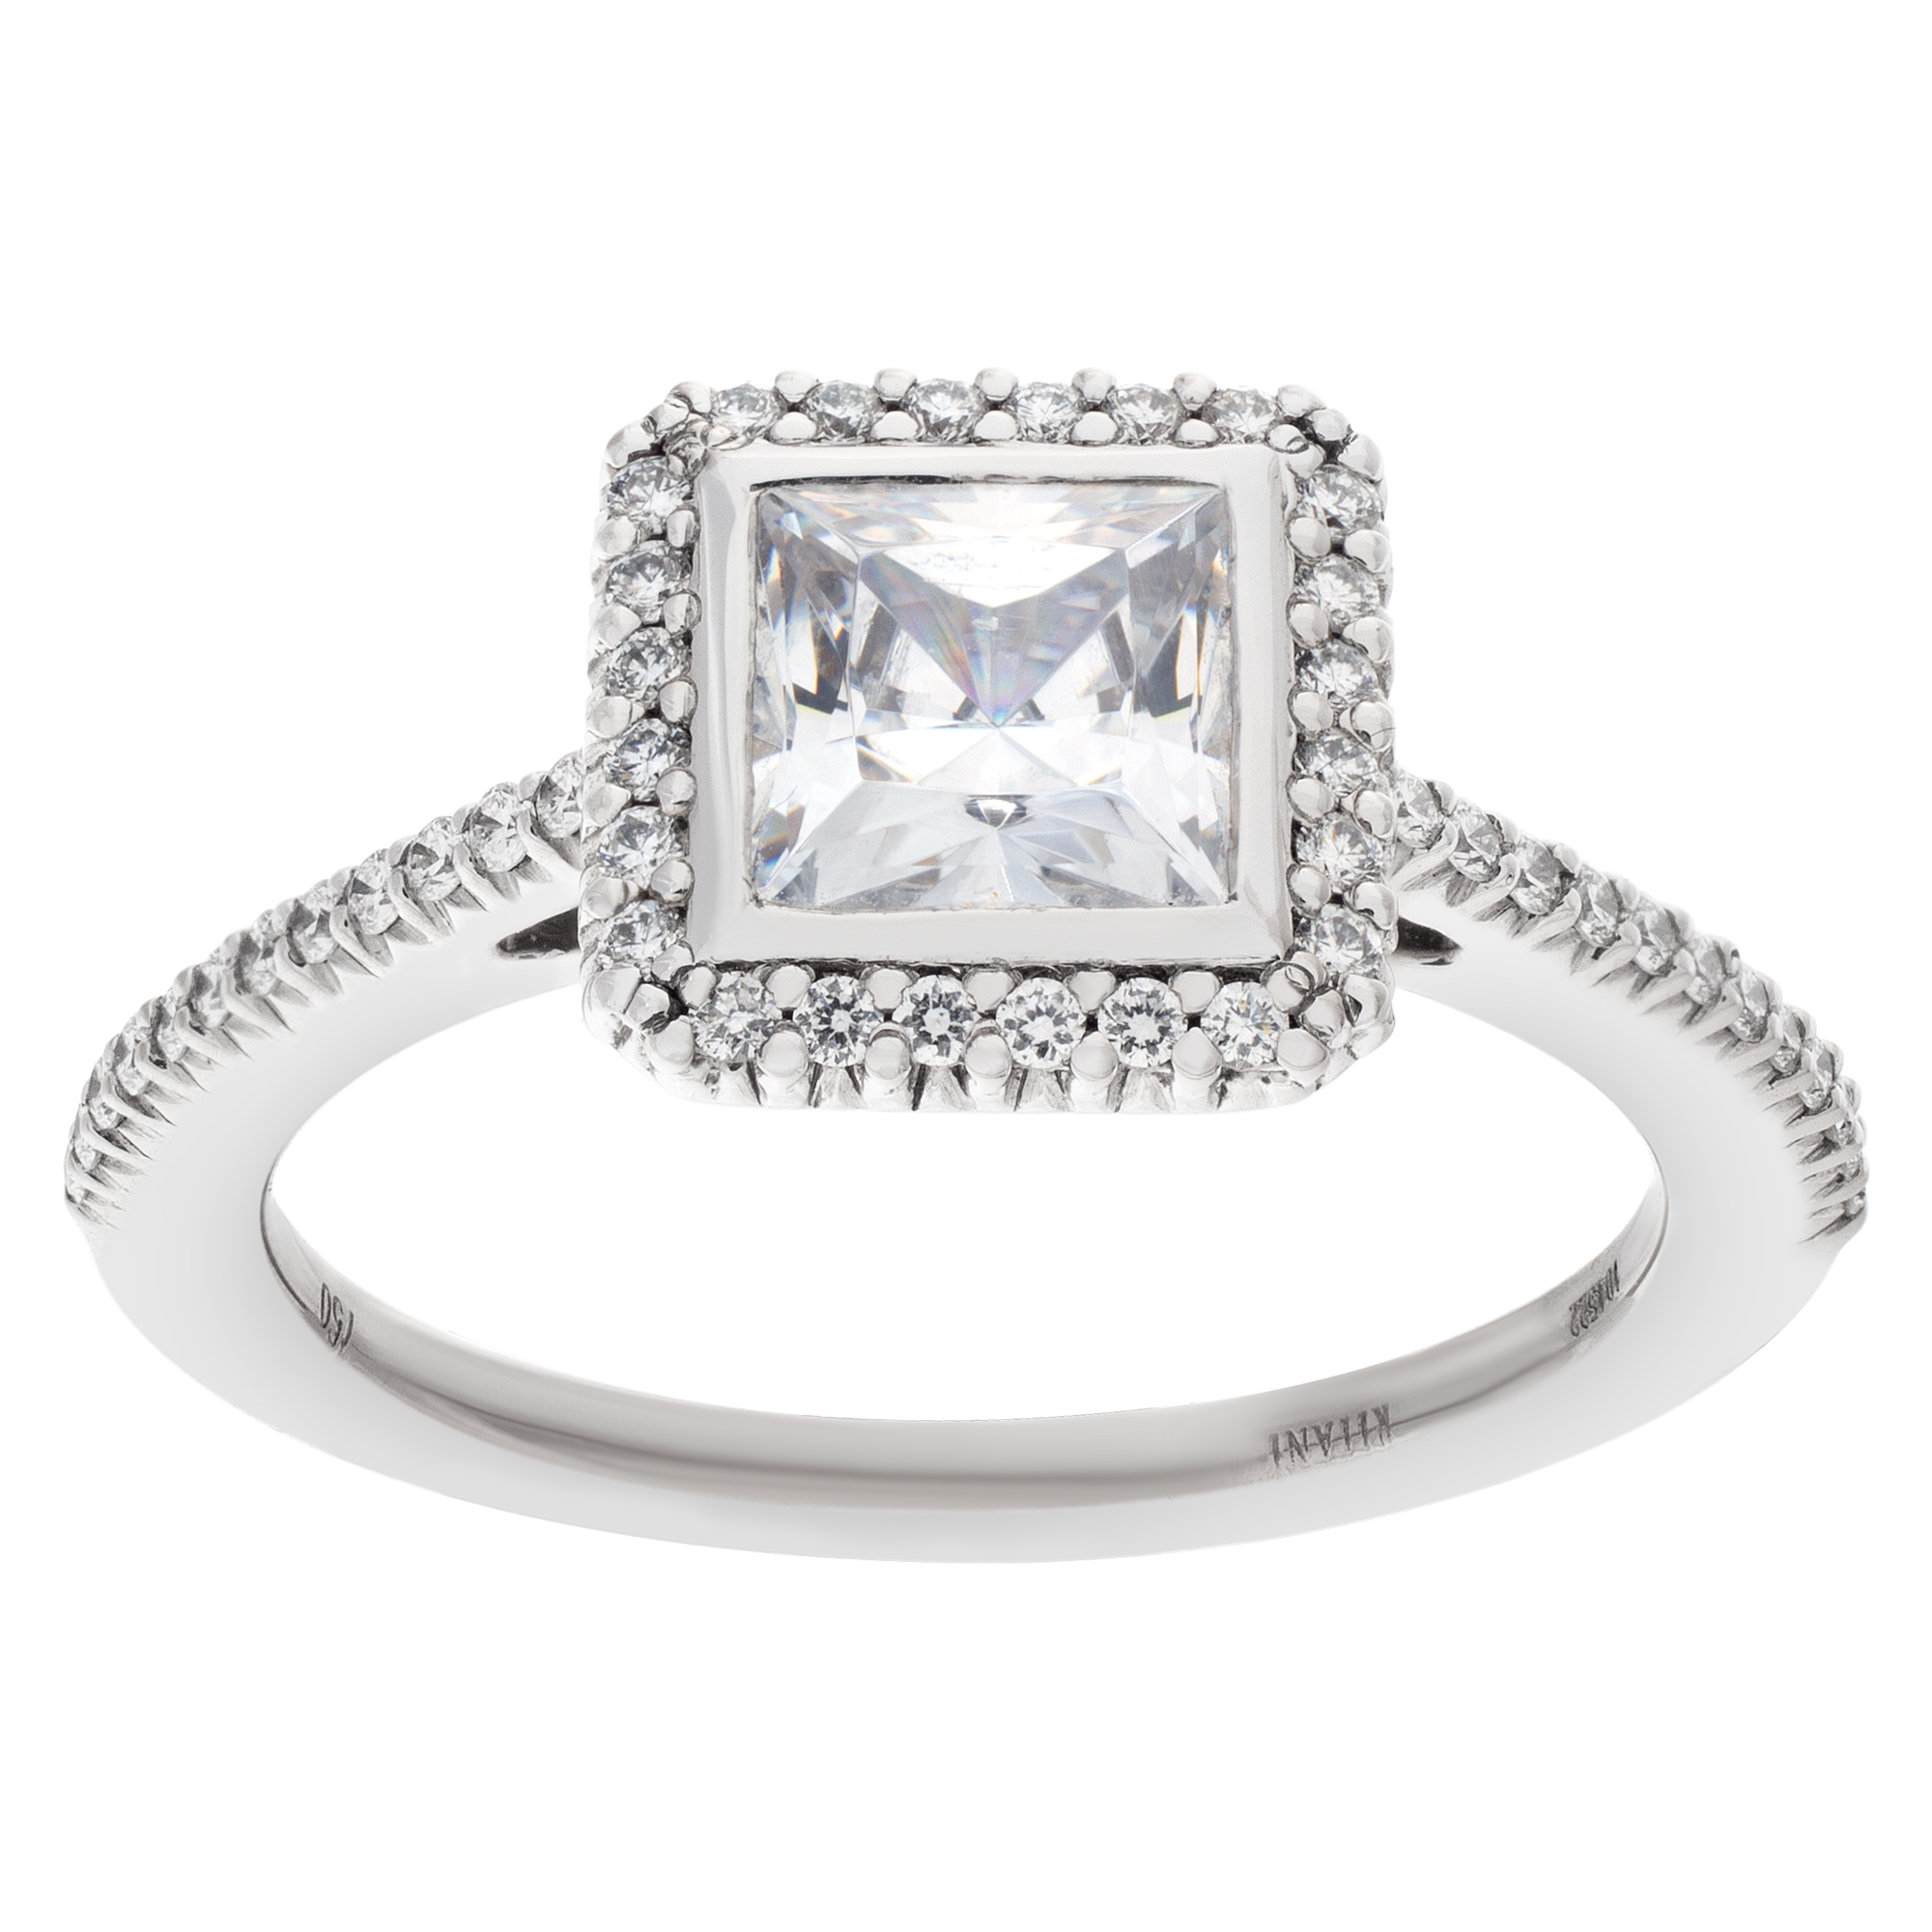 Ritani semi-mount in 18K white gold, with 0.24 carat round damonds to hold 1.0 ct princess cut center stone- Shown with CZ center- Not a Diamond image 1